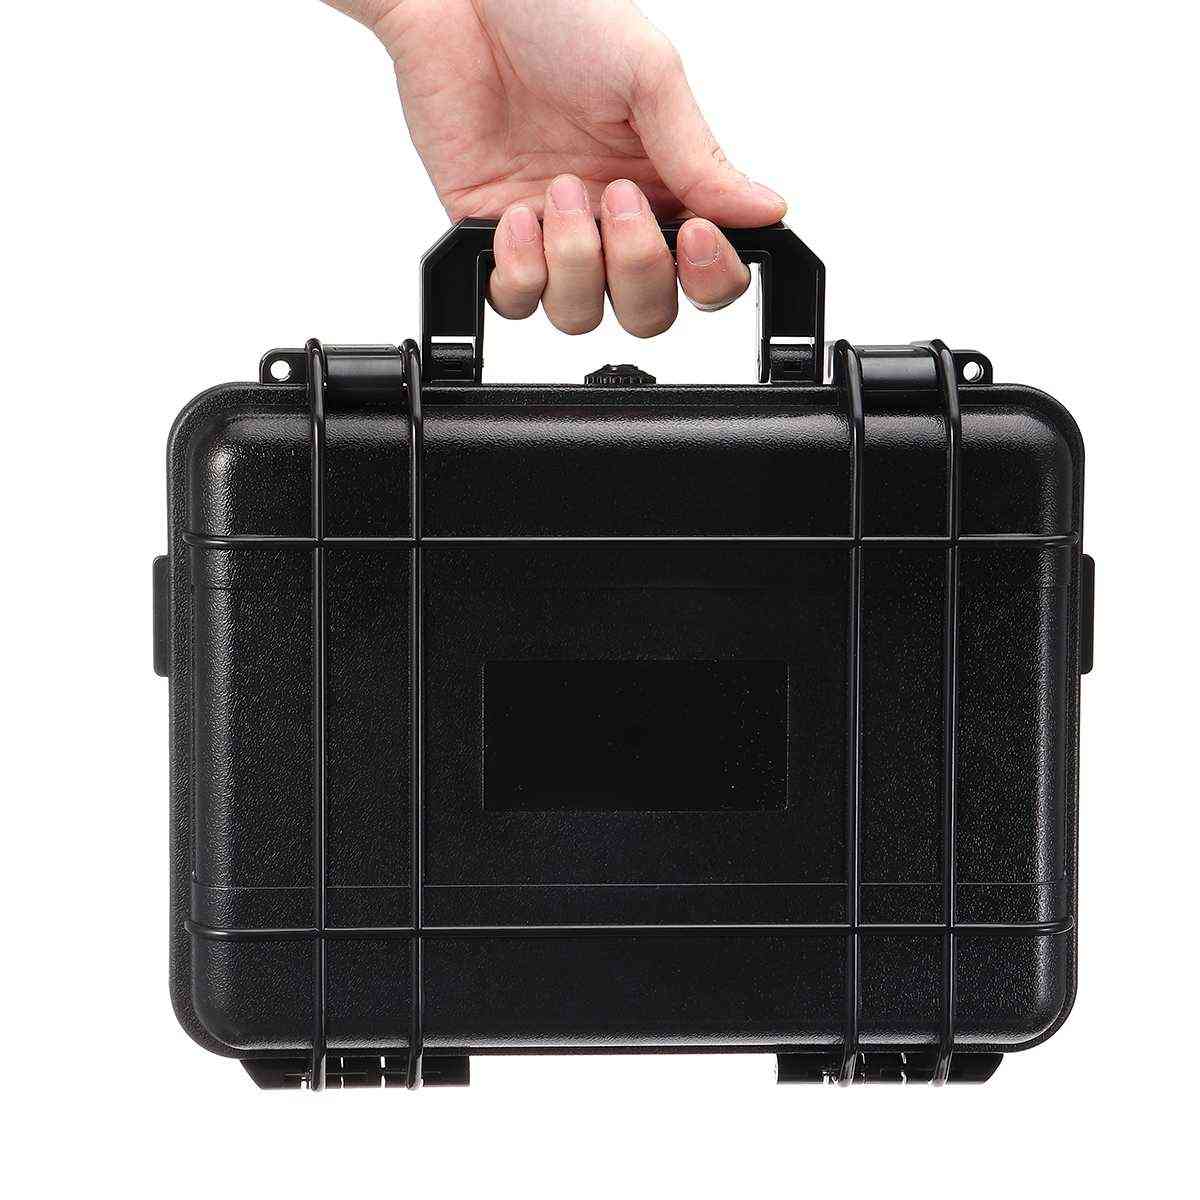 Waterproof Safety Abs Plastic Tool Box - Outdoor Tactical Equipment Storage Container